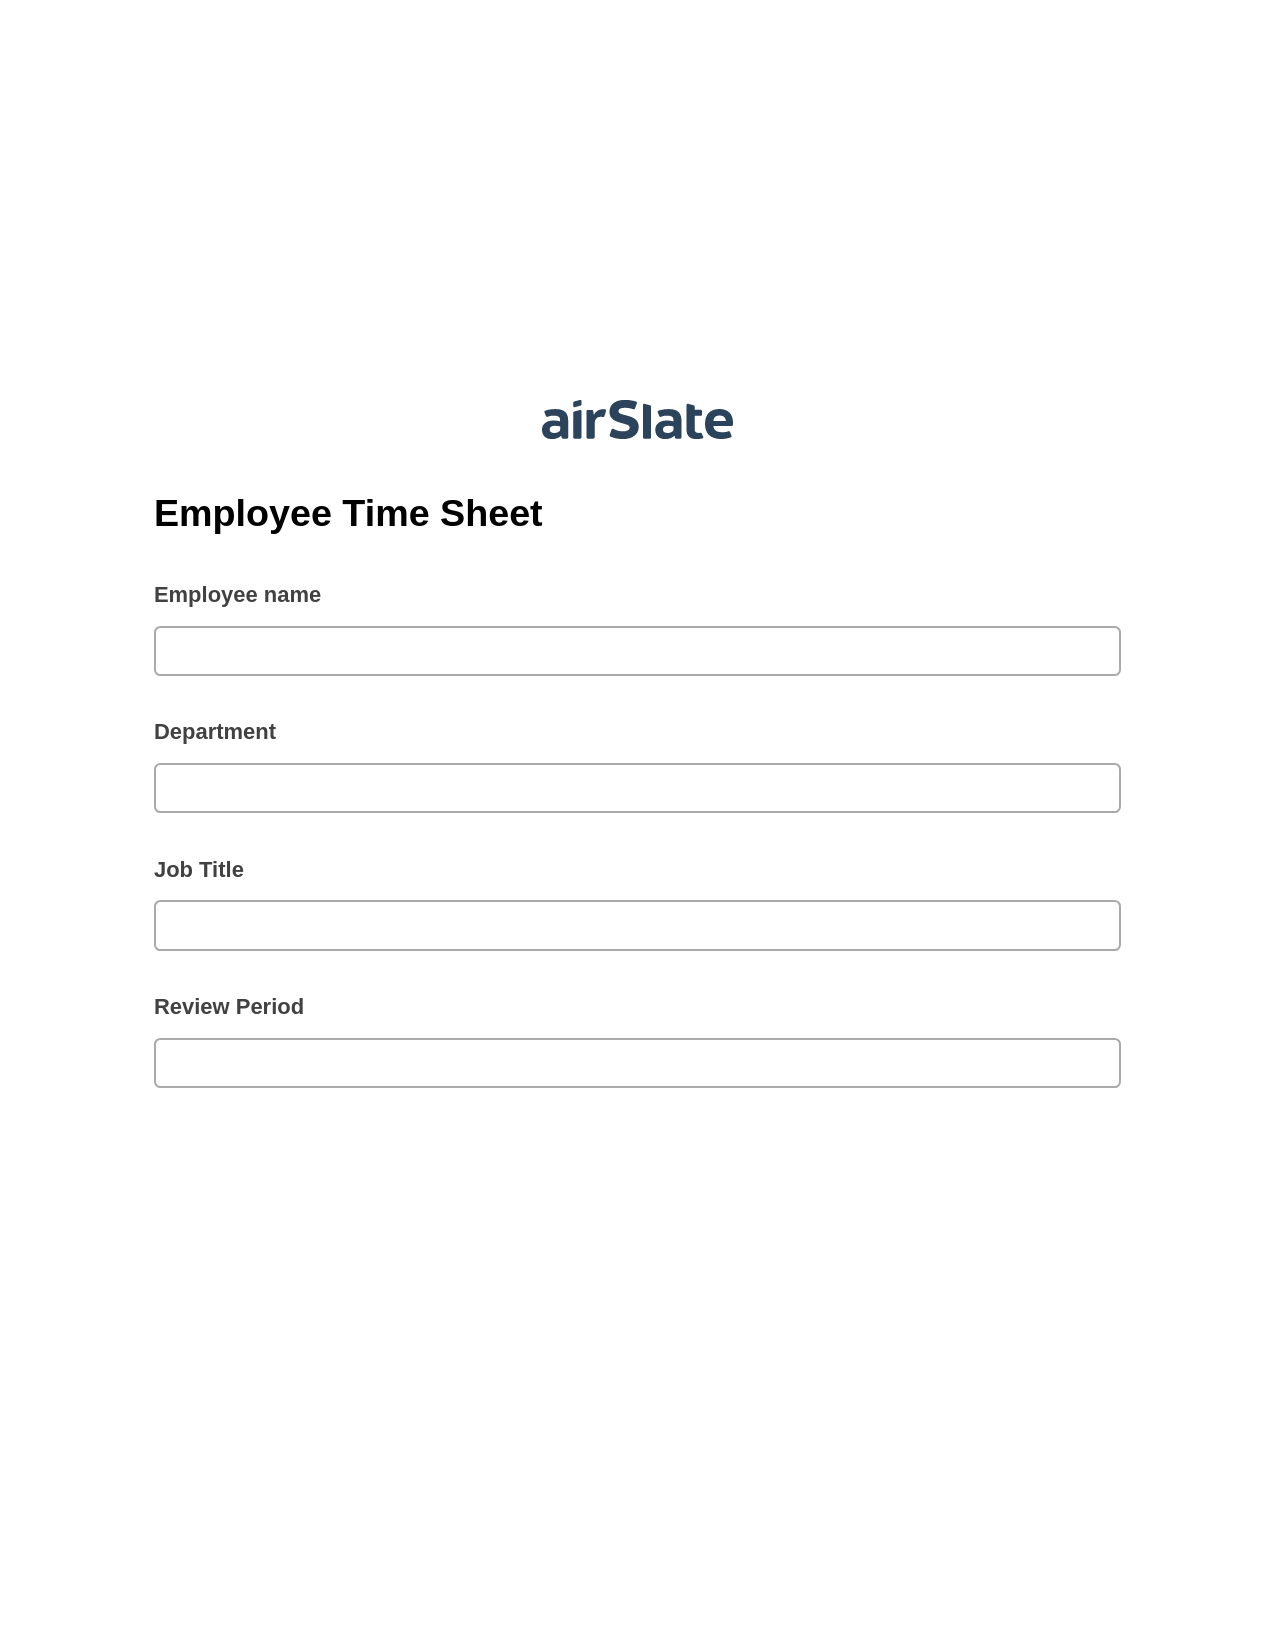 Employee Time Sheet Pre-fill from Salesforce Records with SOQL Bot, Create Salesforce Records Bot, Archive to SharePoint Folder Bot